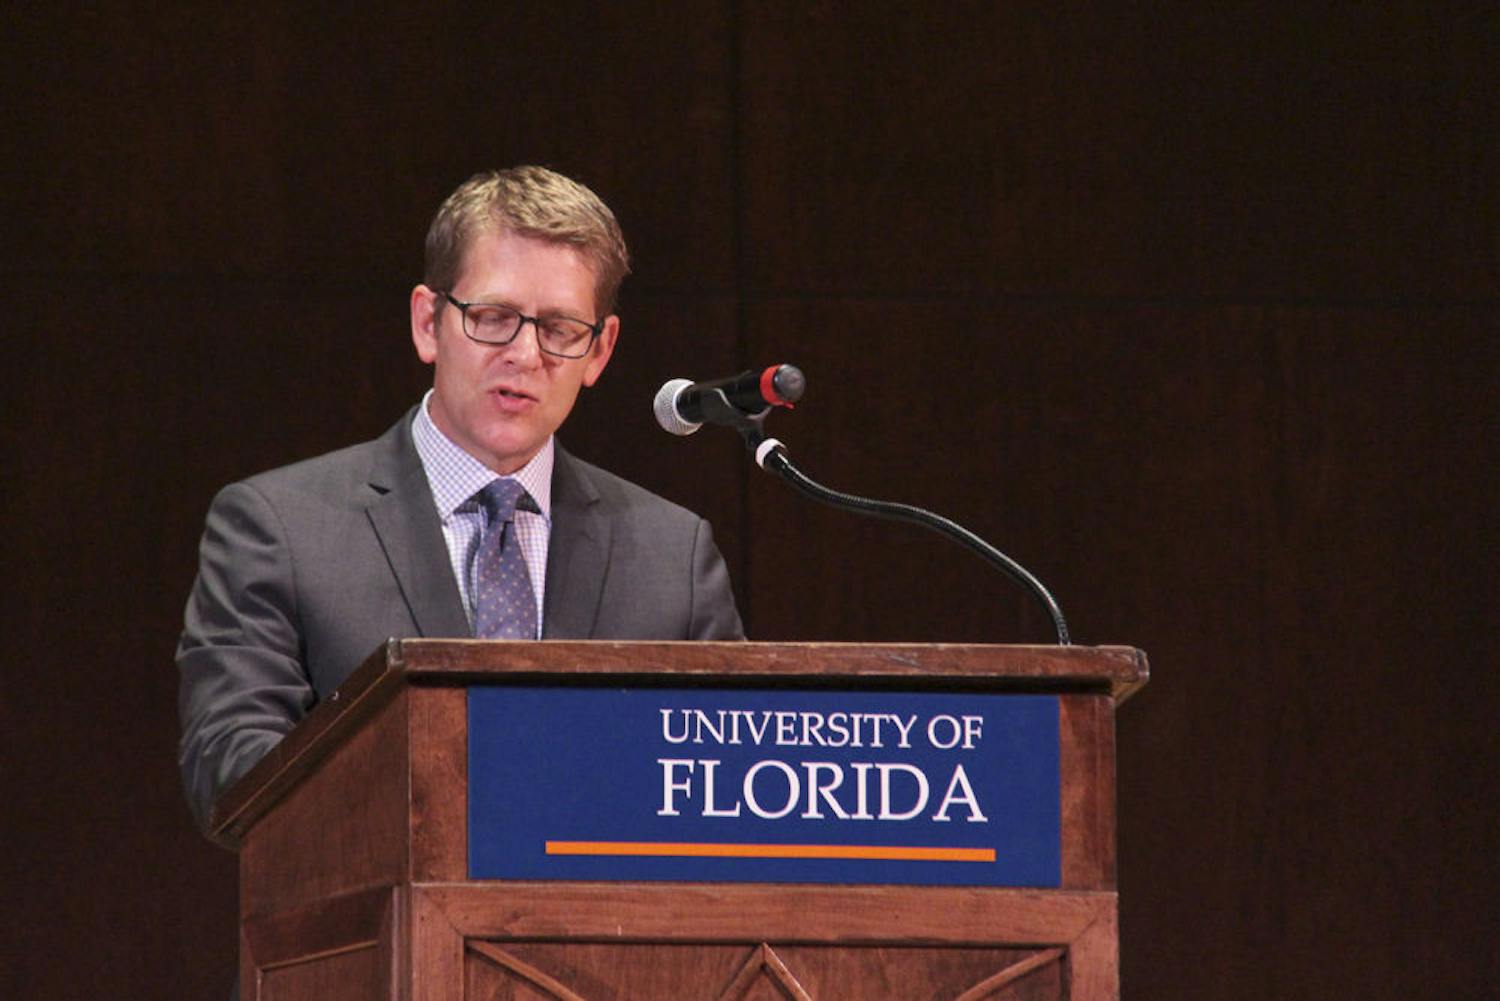 Former White House Press Secretary Jay Carney speaks as a part of the UF Accent Speaker’s Bureau at the University Auditorium on Monday night.